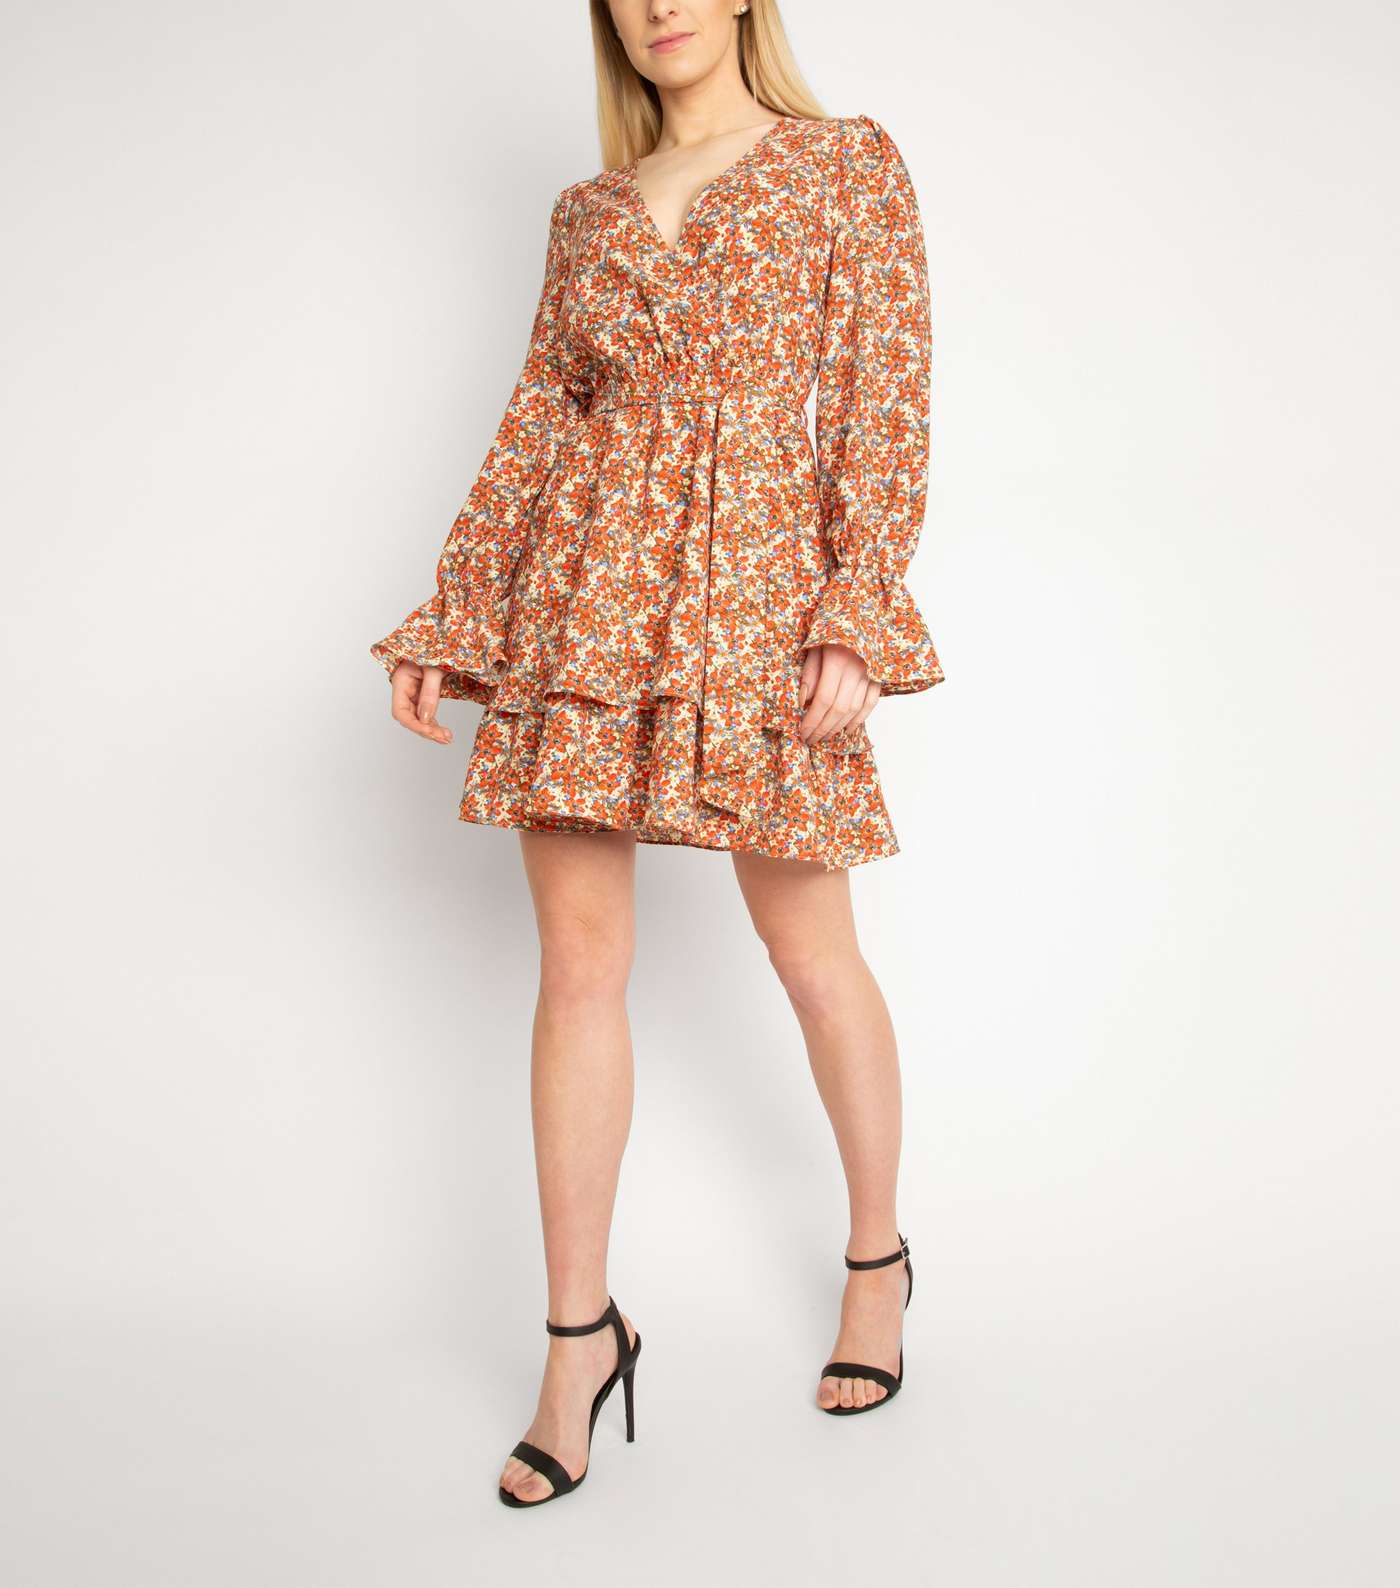 Another Look Red Floral Frill Dress Image 2